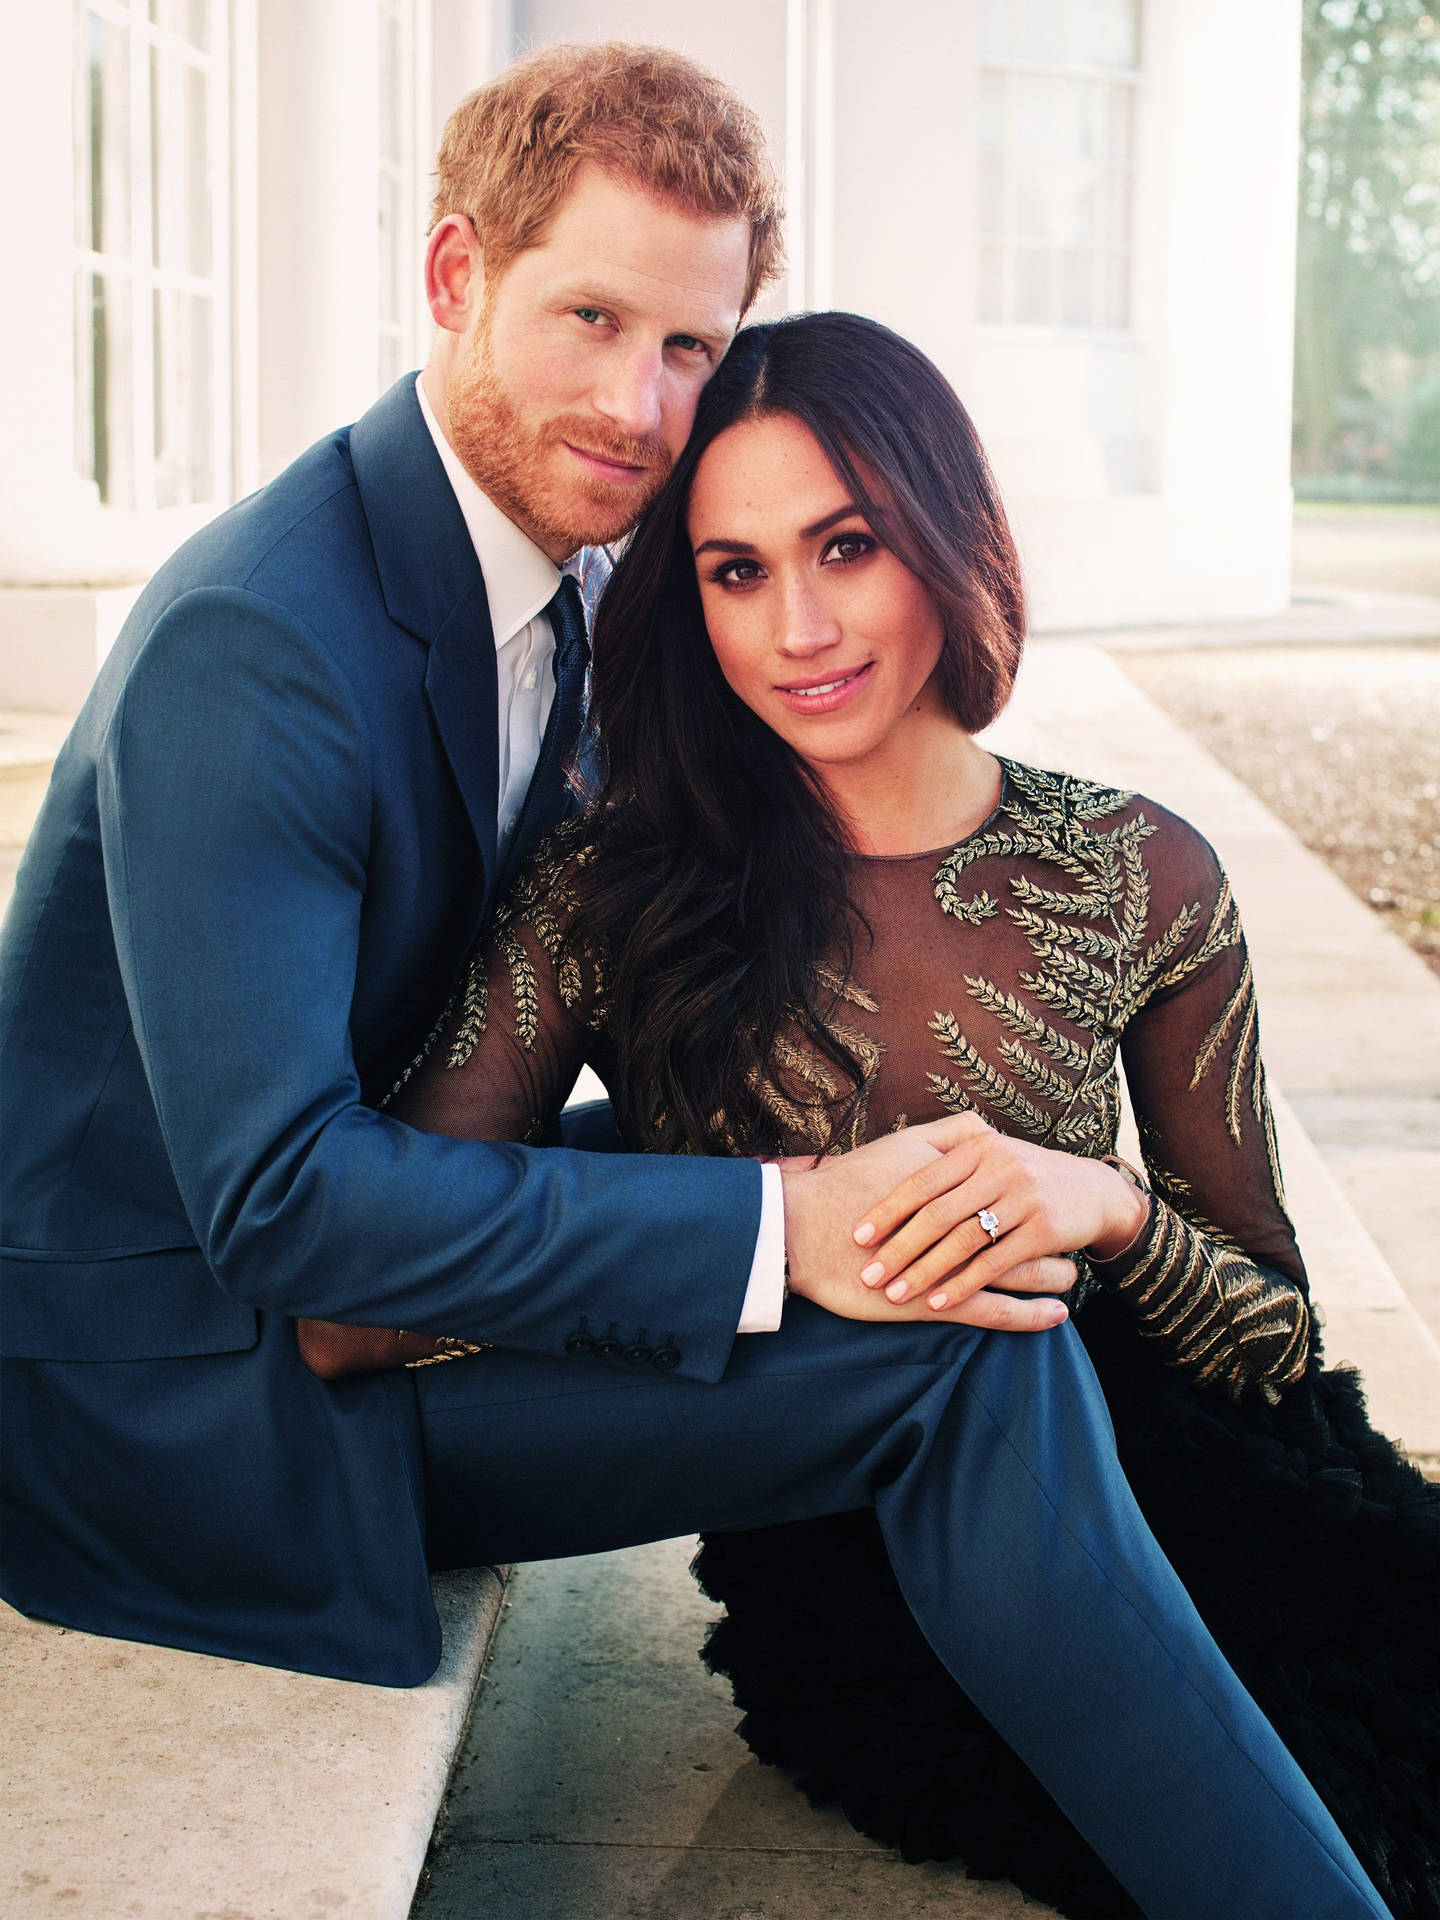 Prince Harry And Meghan Markle Relationship Background